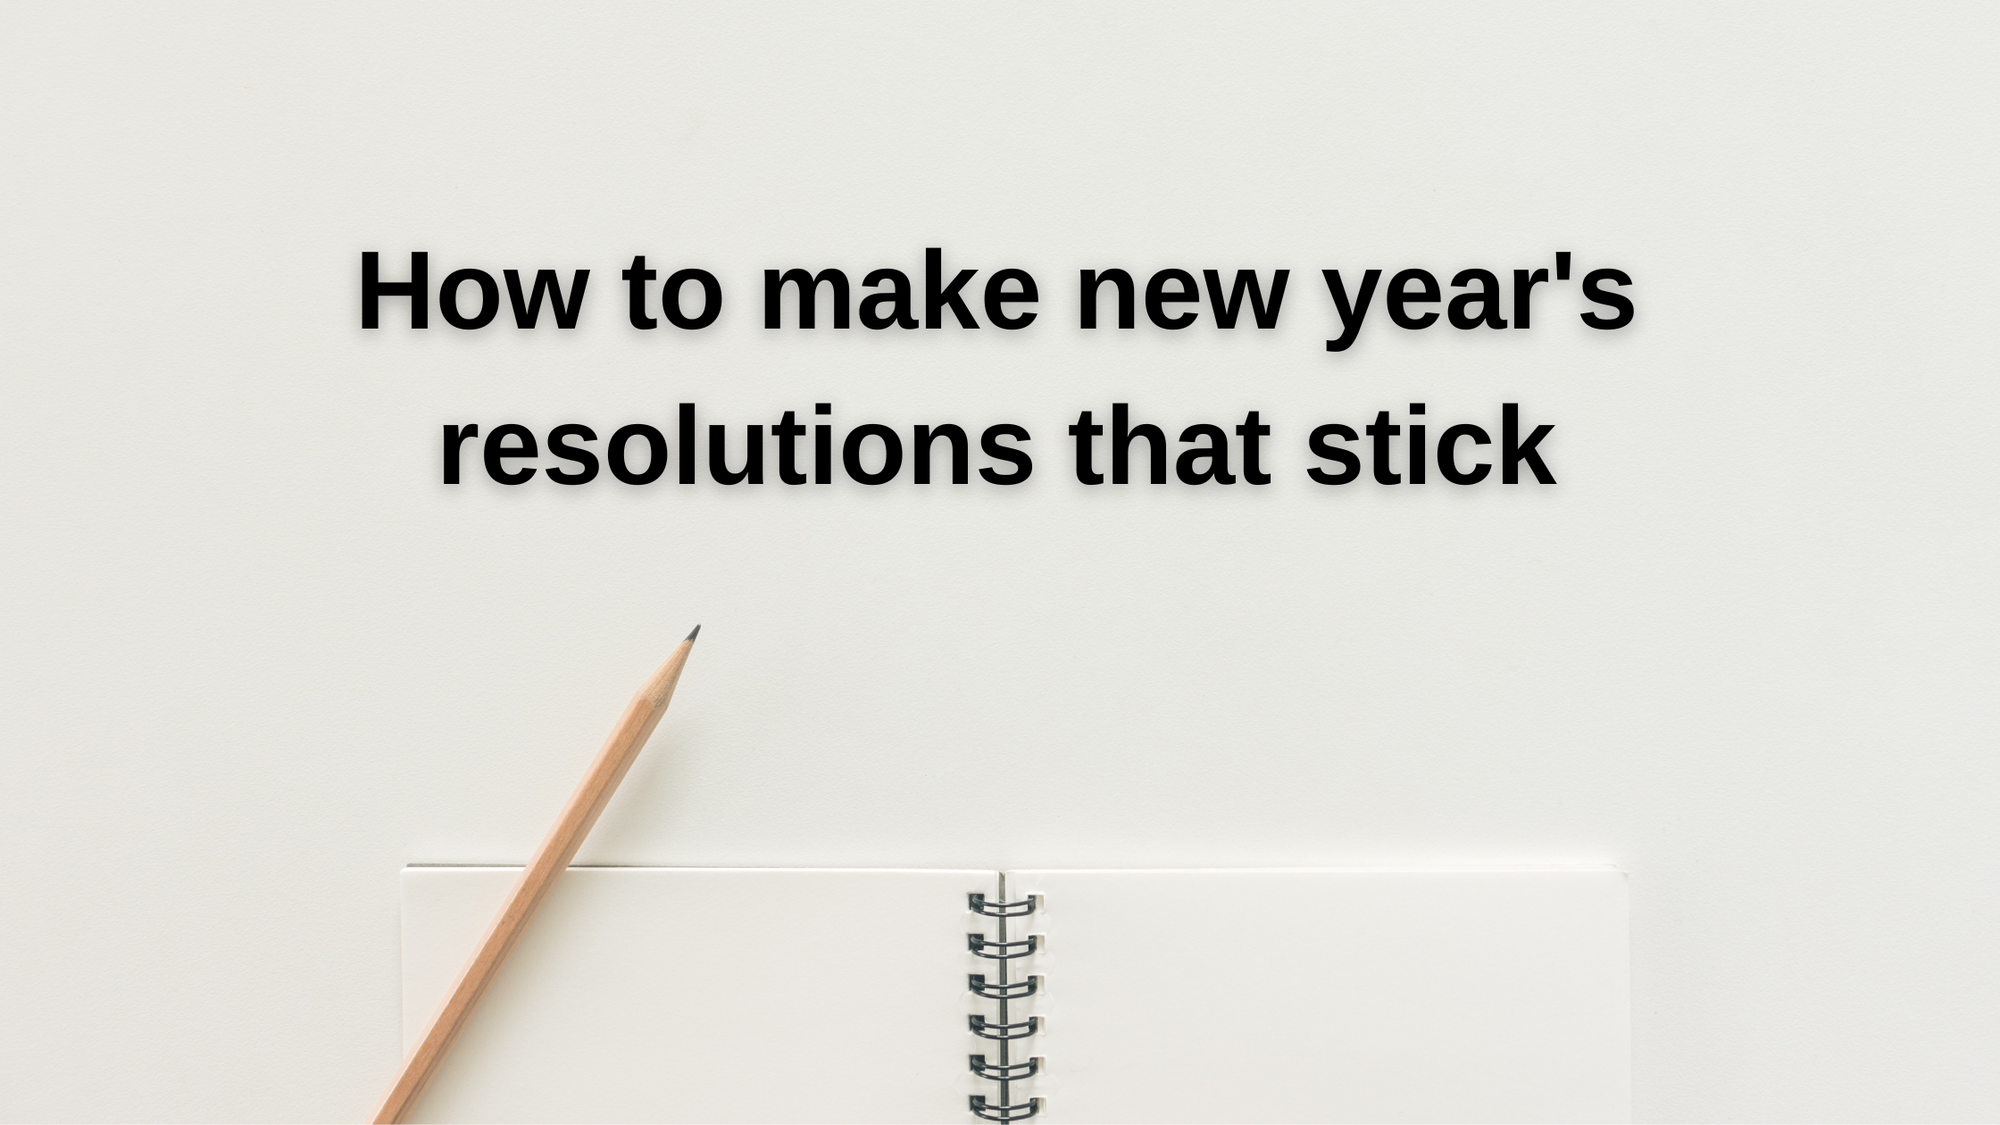 HOW TO MAKE YOUR NEW YEAR'S RESOLUTIONS THAT STICK